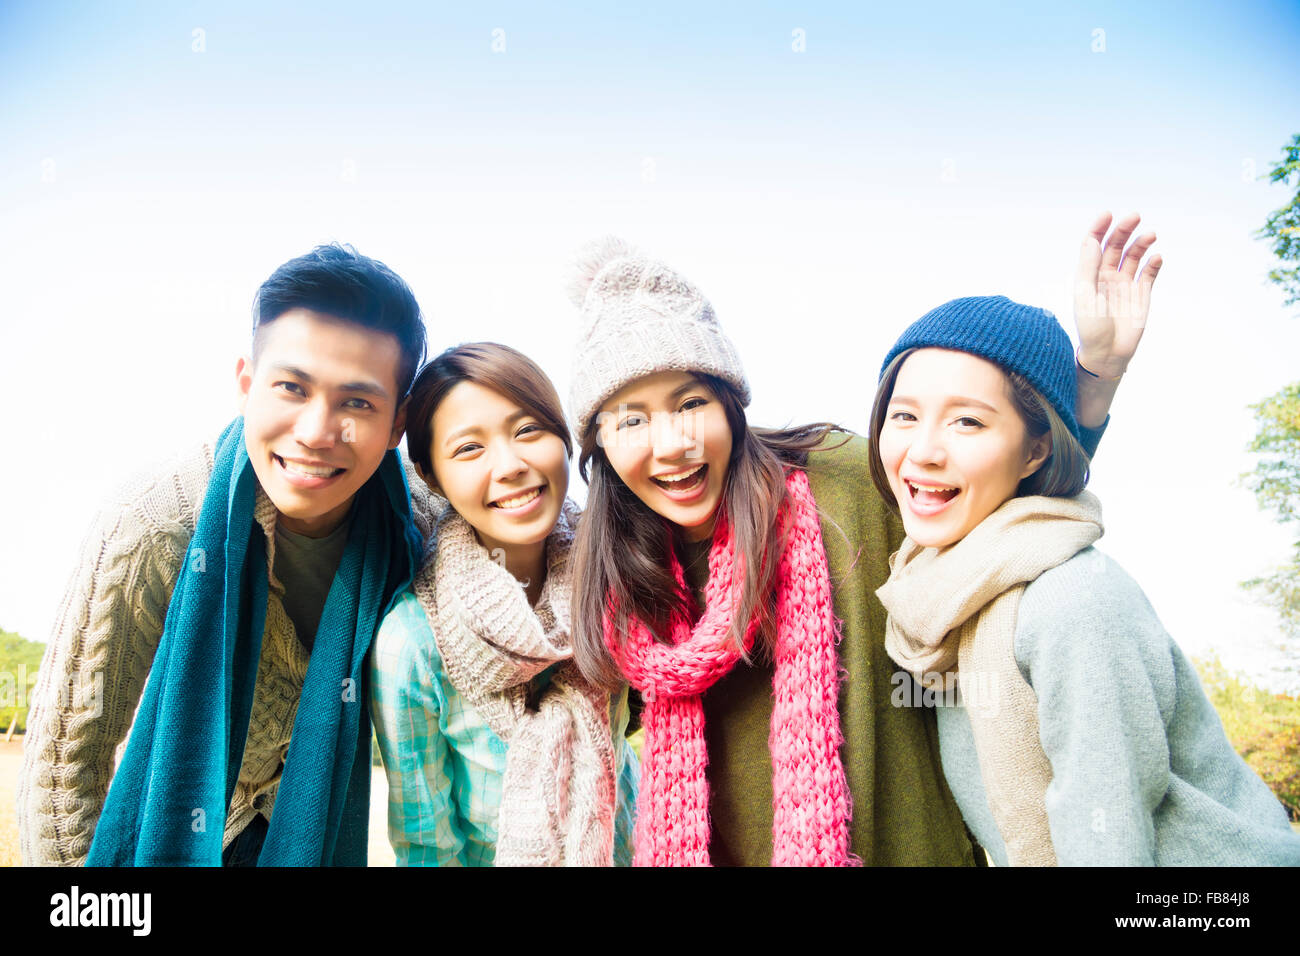 happy young group with winter wear Stock Photo